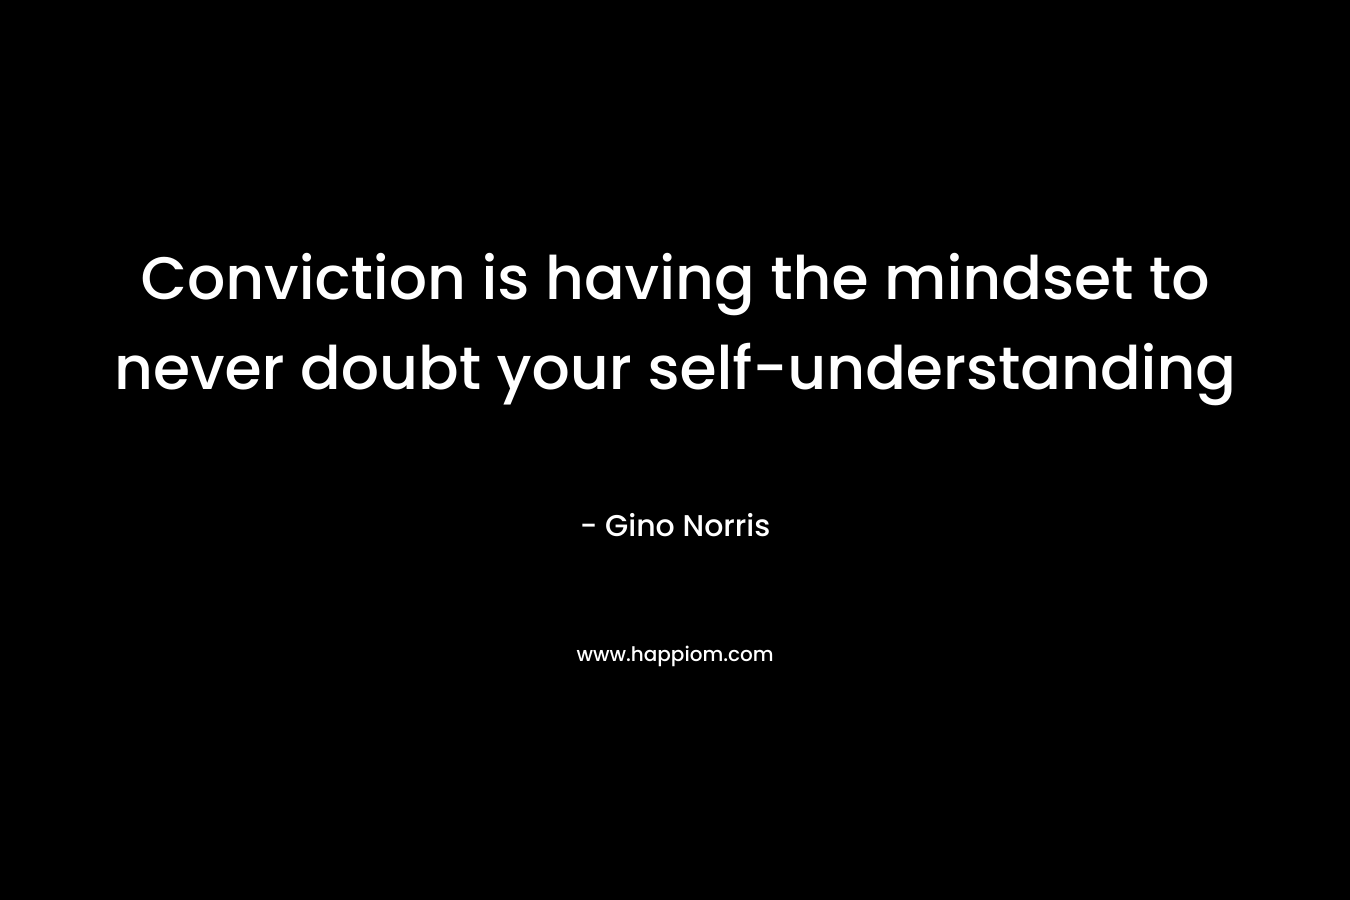 Conviction is having the mindset to never doubt your self-understanding